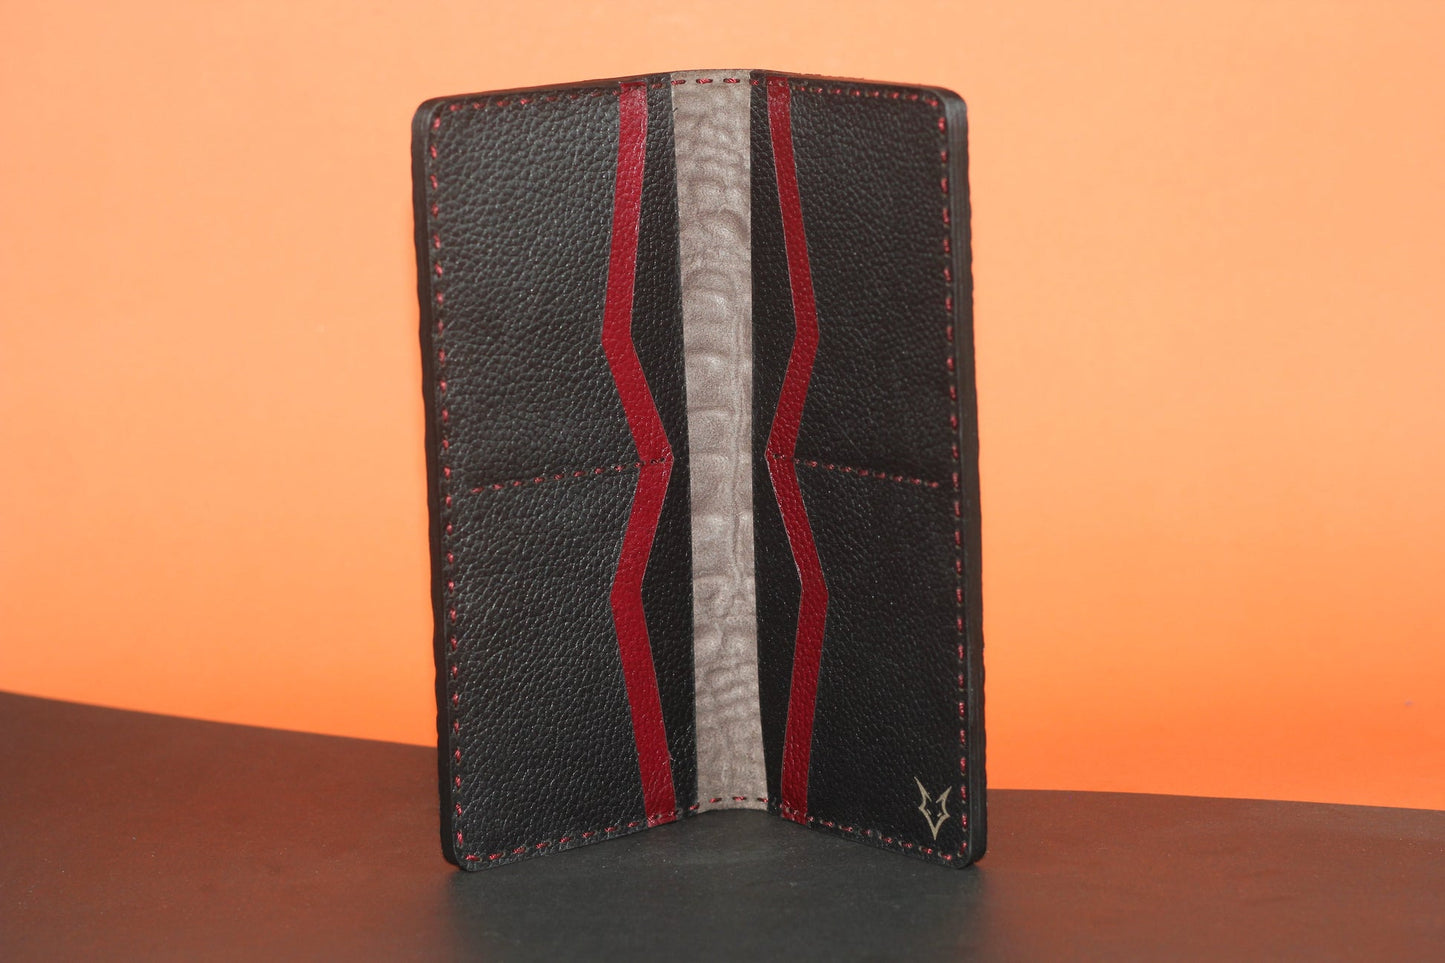 Unisex Genuine Leather Wallet With High-Glossed Maroon Crocodile Textured Finish | Exotic Bifold Long Wallet